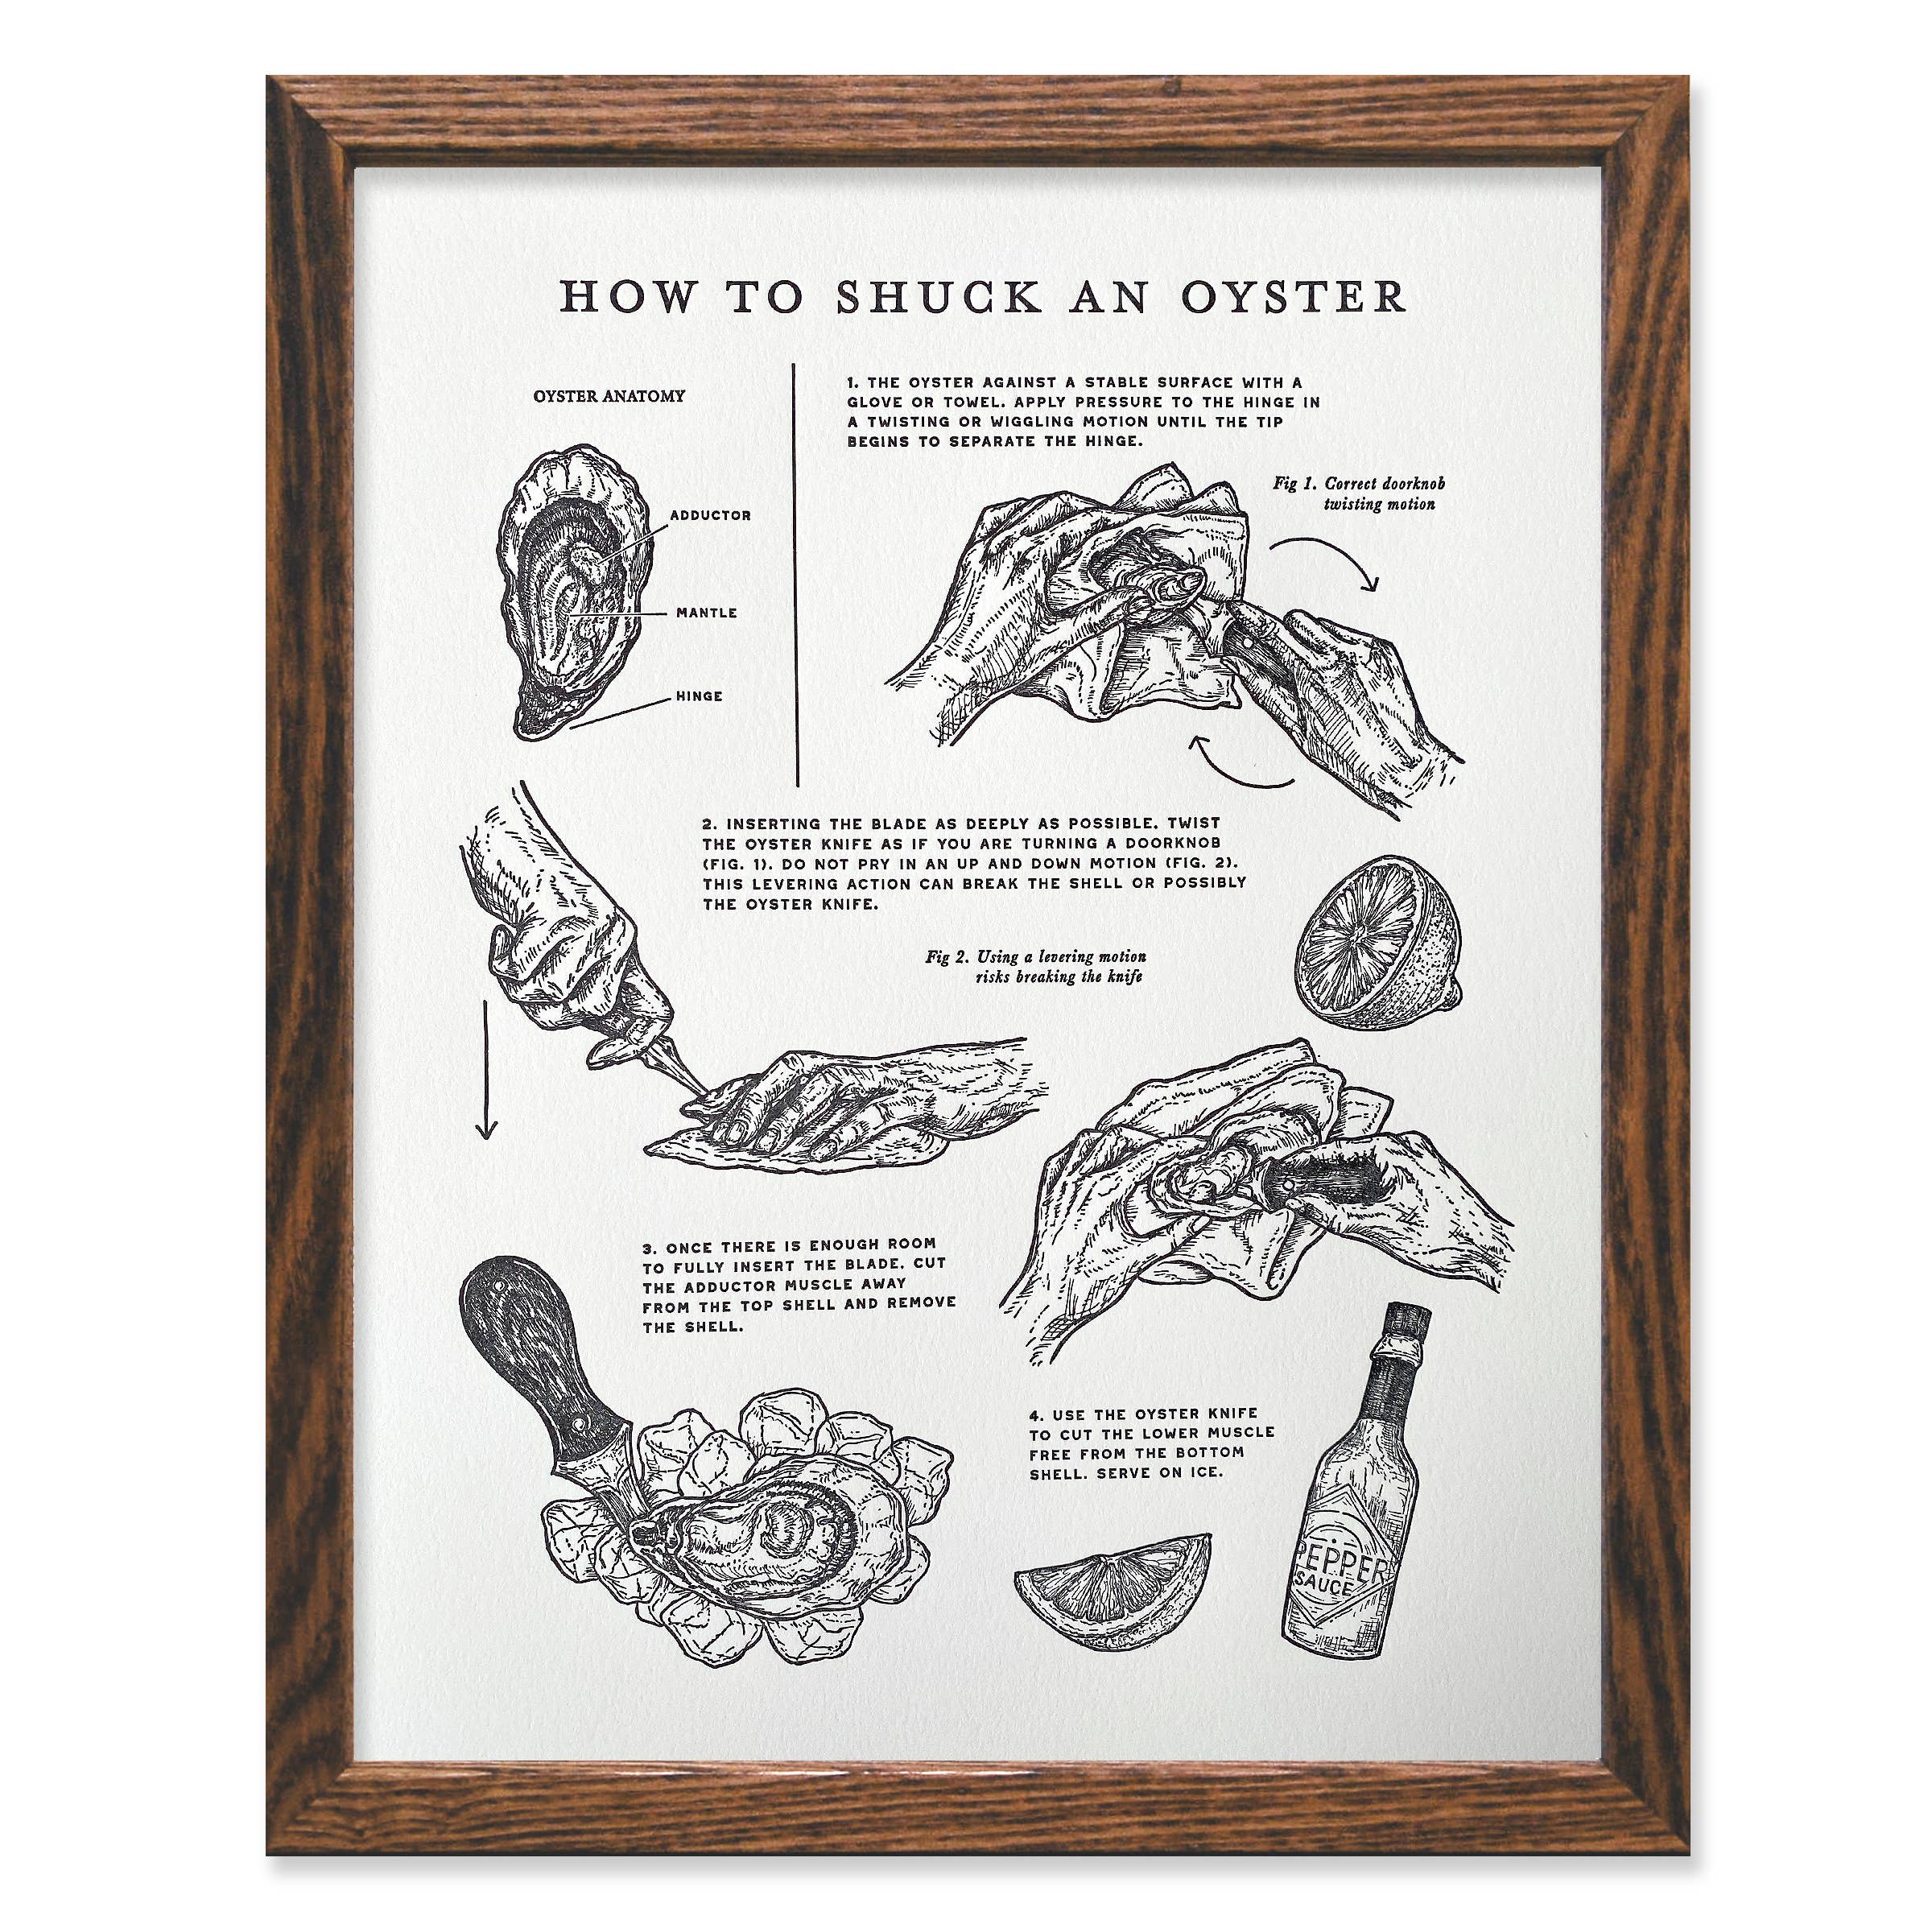 Oyster Shucking Gloves Sold How You Use Them - Separately